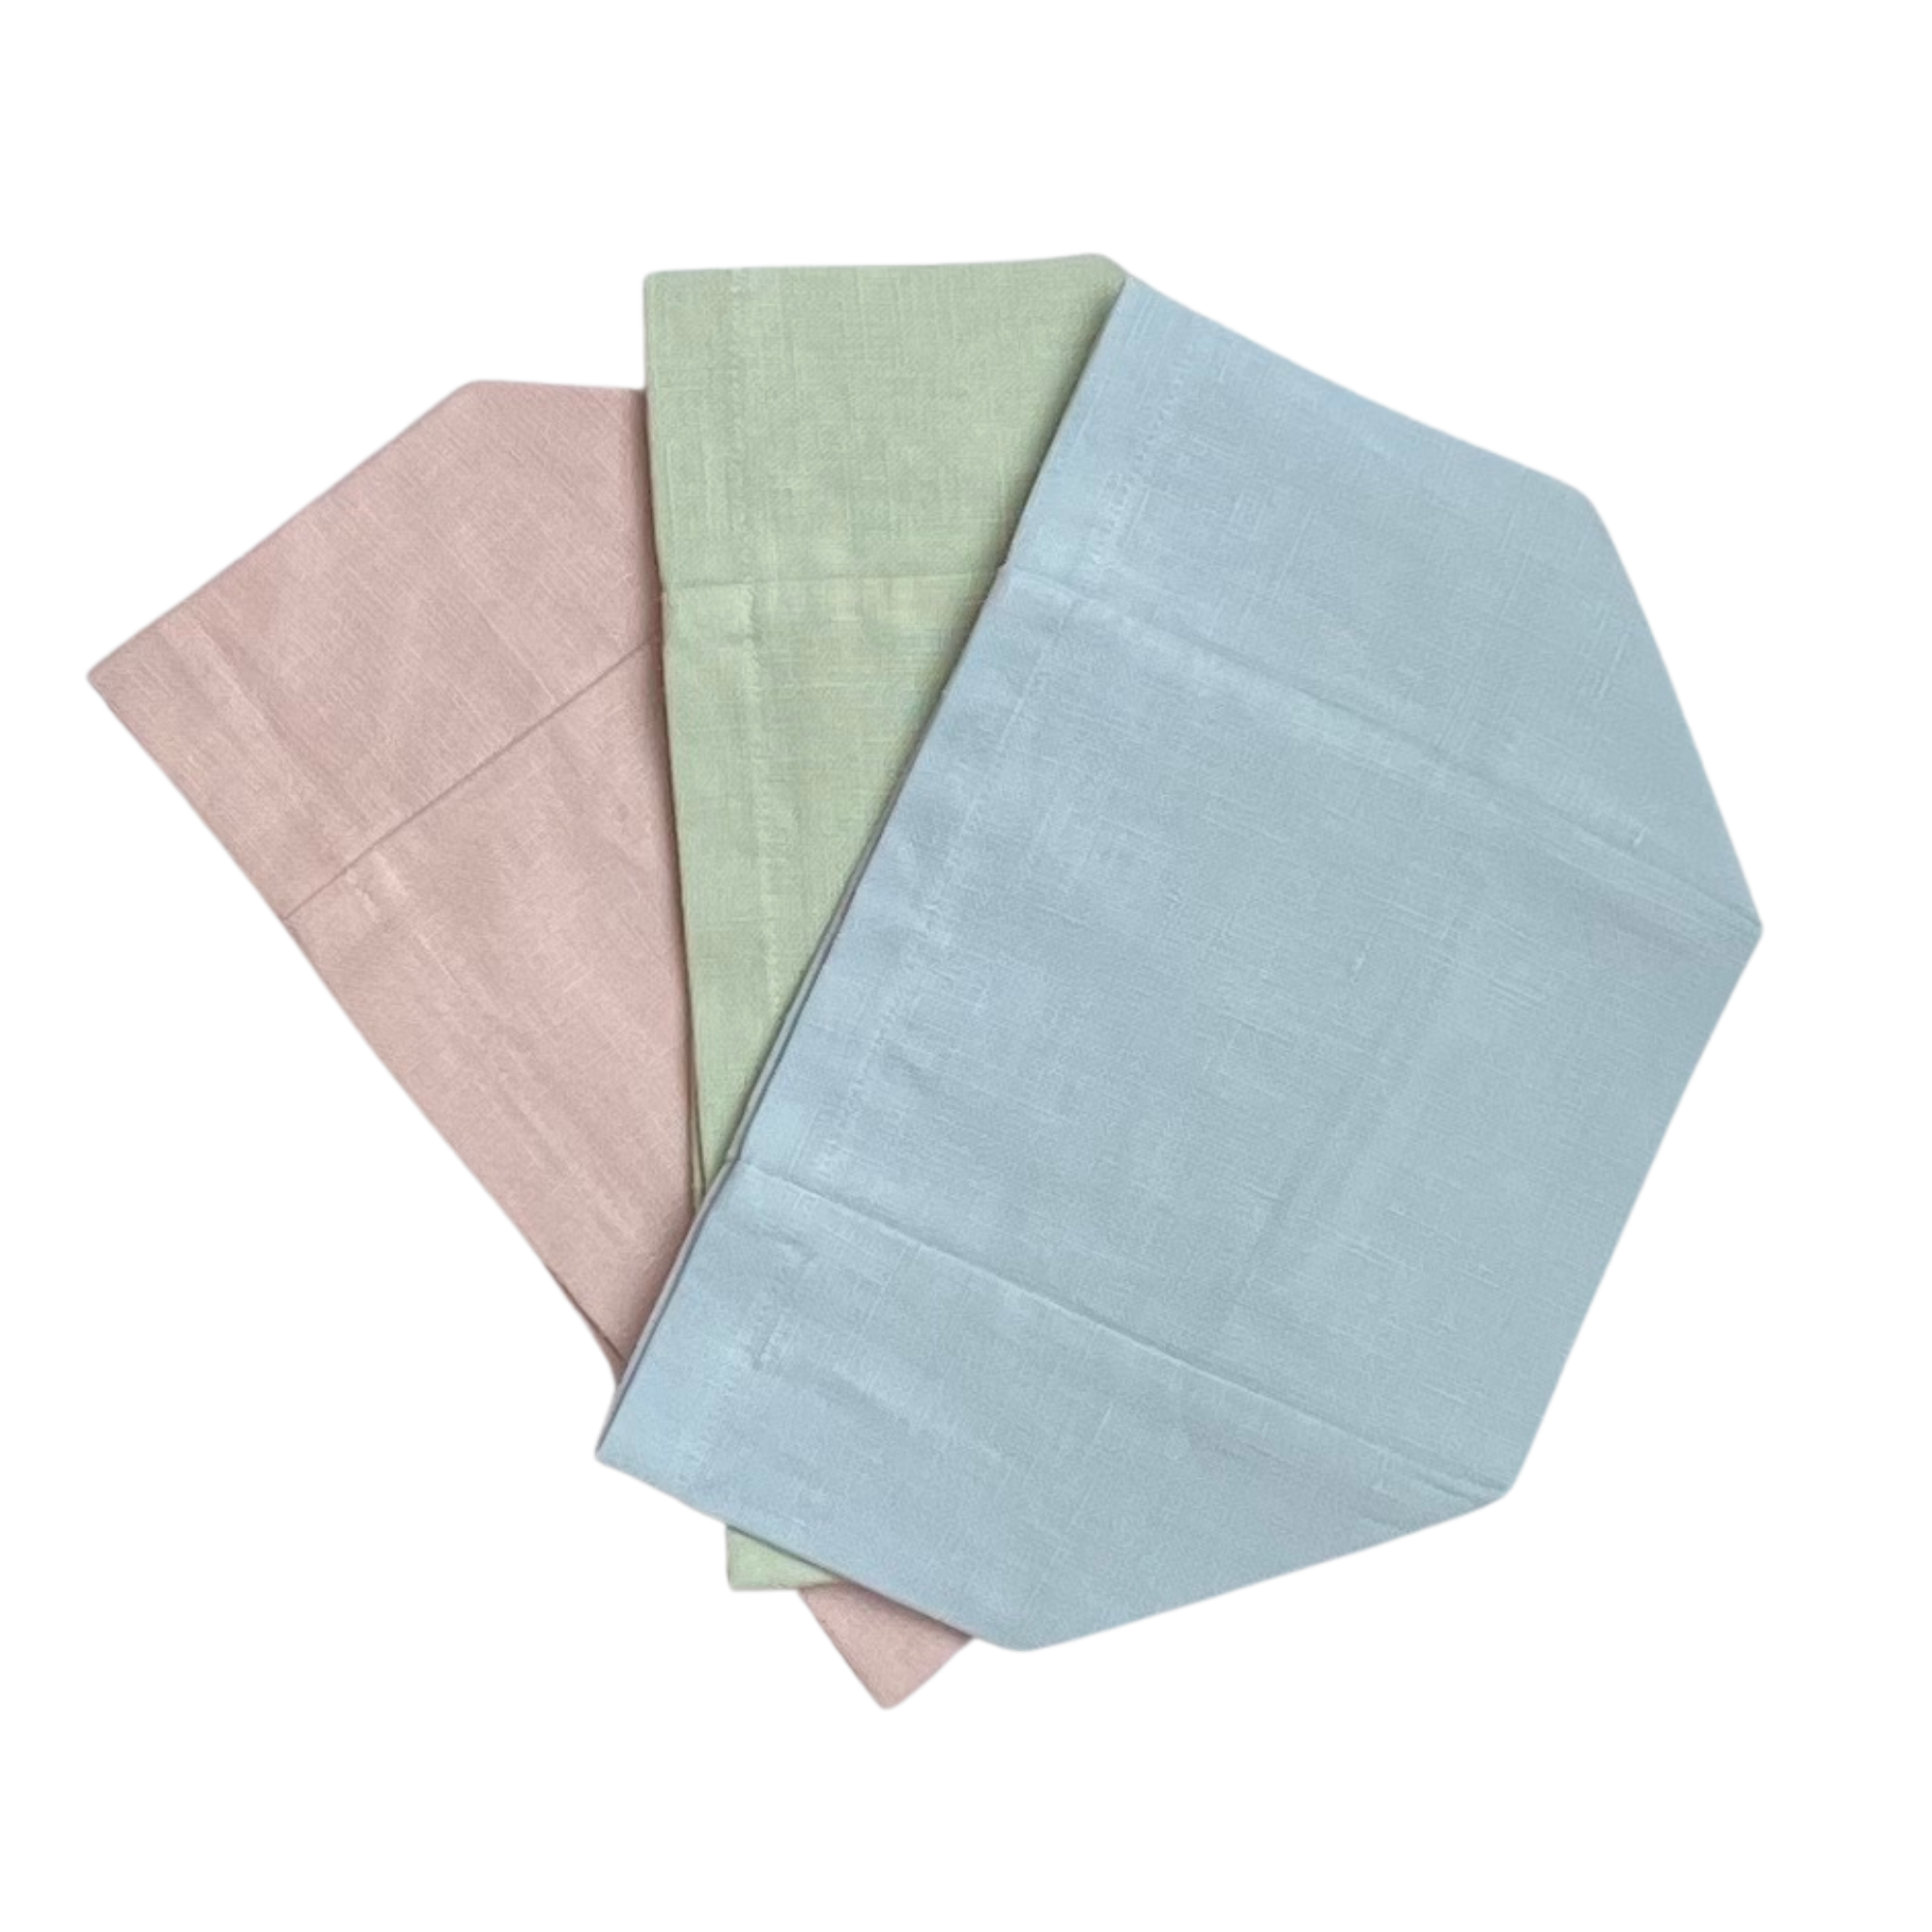 Make your tissue boxes pretty with these stylish pastel linen covers! Choose from several colors. Perfect for embroidery or as-is. Made from 100% European linen. These covers fit standard sized cube tissue boxes (4.5" x 4.5" x 5".)